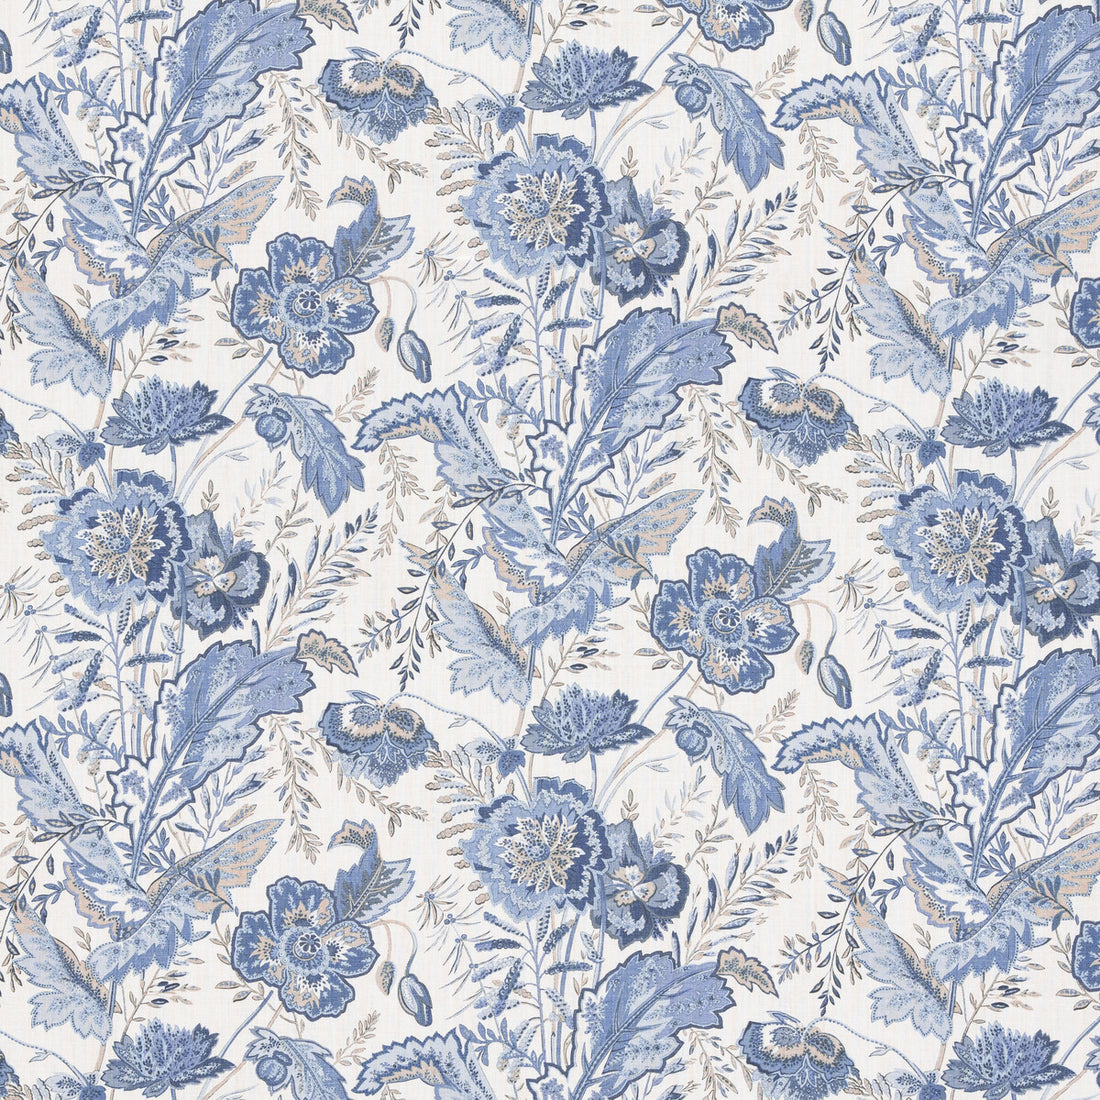 Indienne Flower fabric in blue color - pattern BP10938.1.0 - by G P &amp; J Baker in the Caspian collection